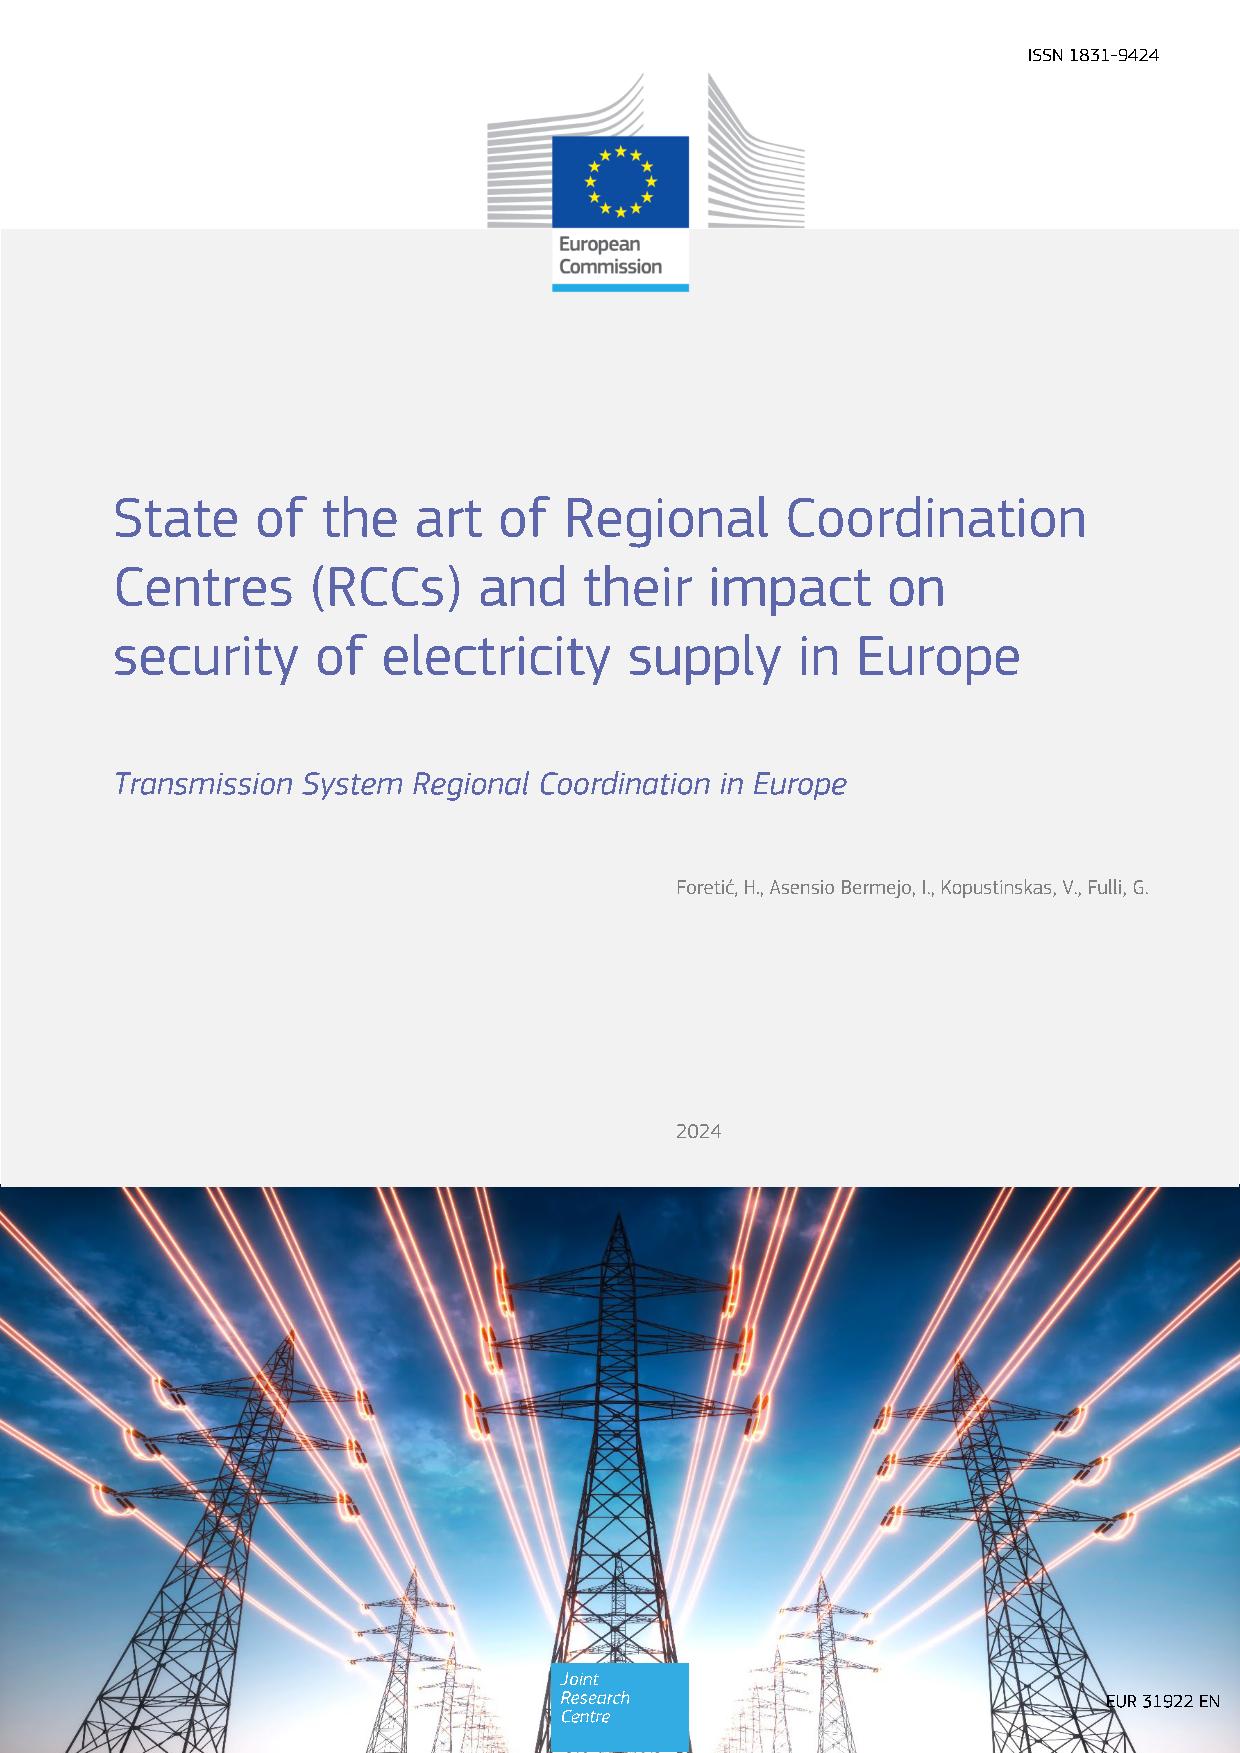 2024 - Regional Coordination Centres (RCCs) and EU's security of electricity supply